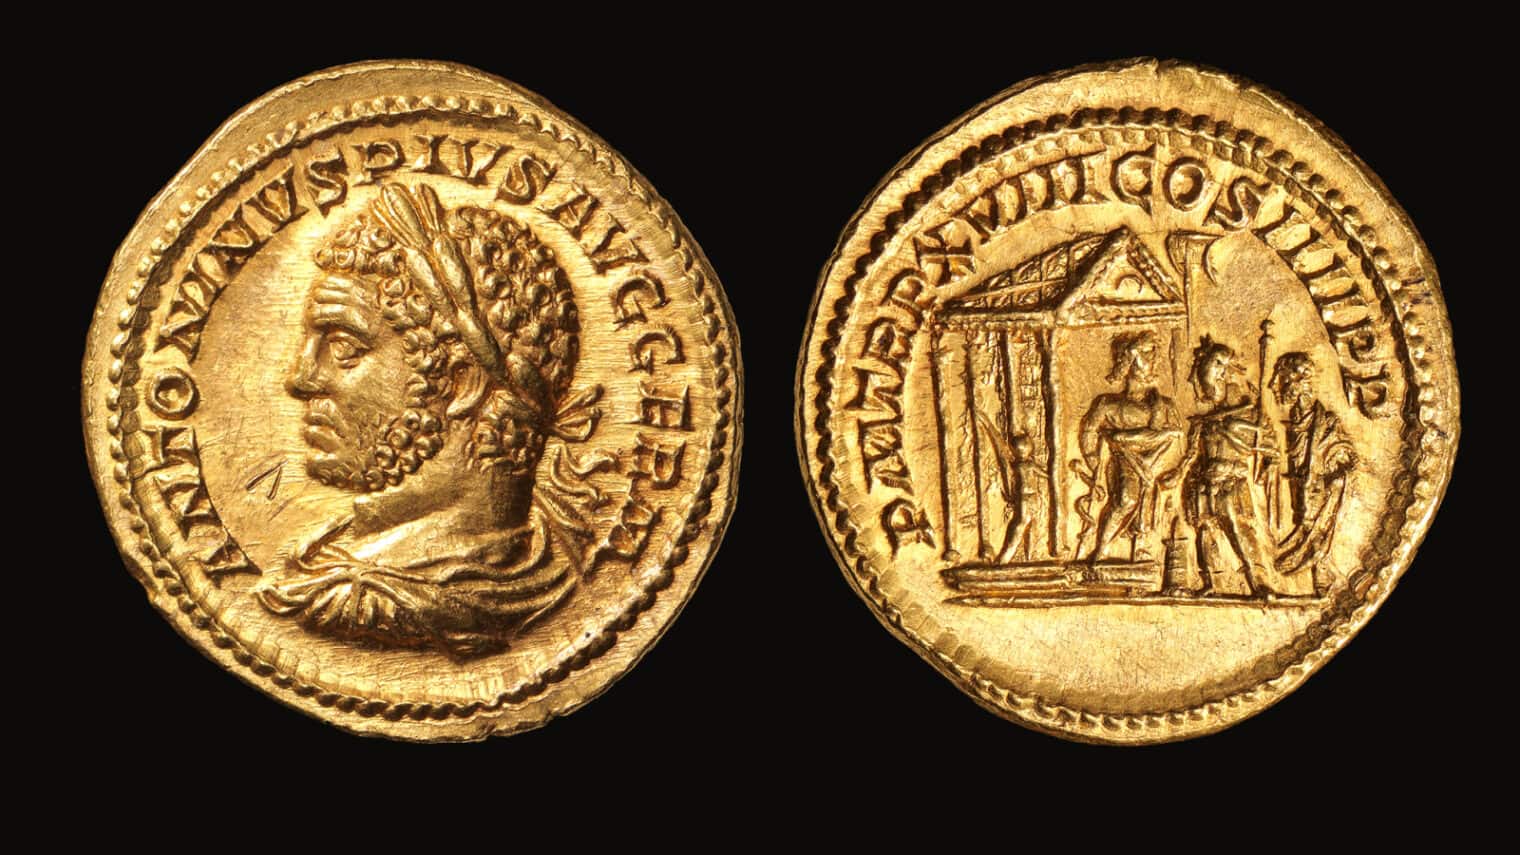 Roman coins from The Israel Museum’s numismatic collection. Photo by Elie Posner/The Israel Museum